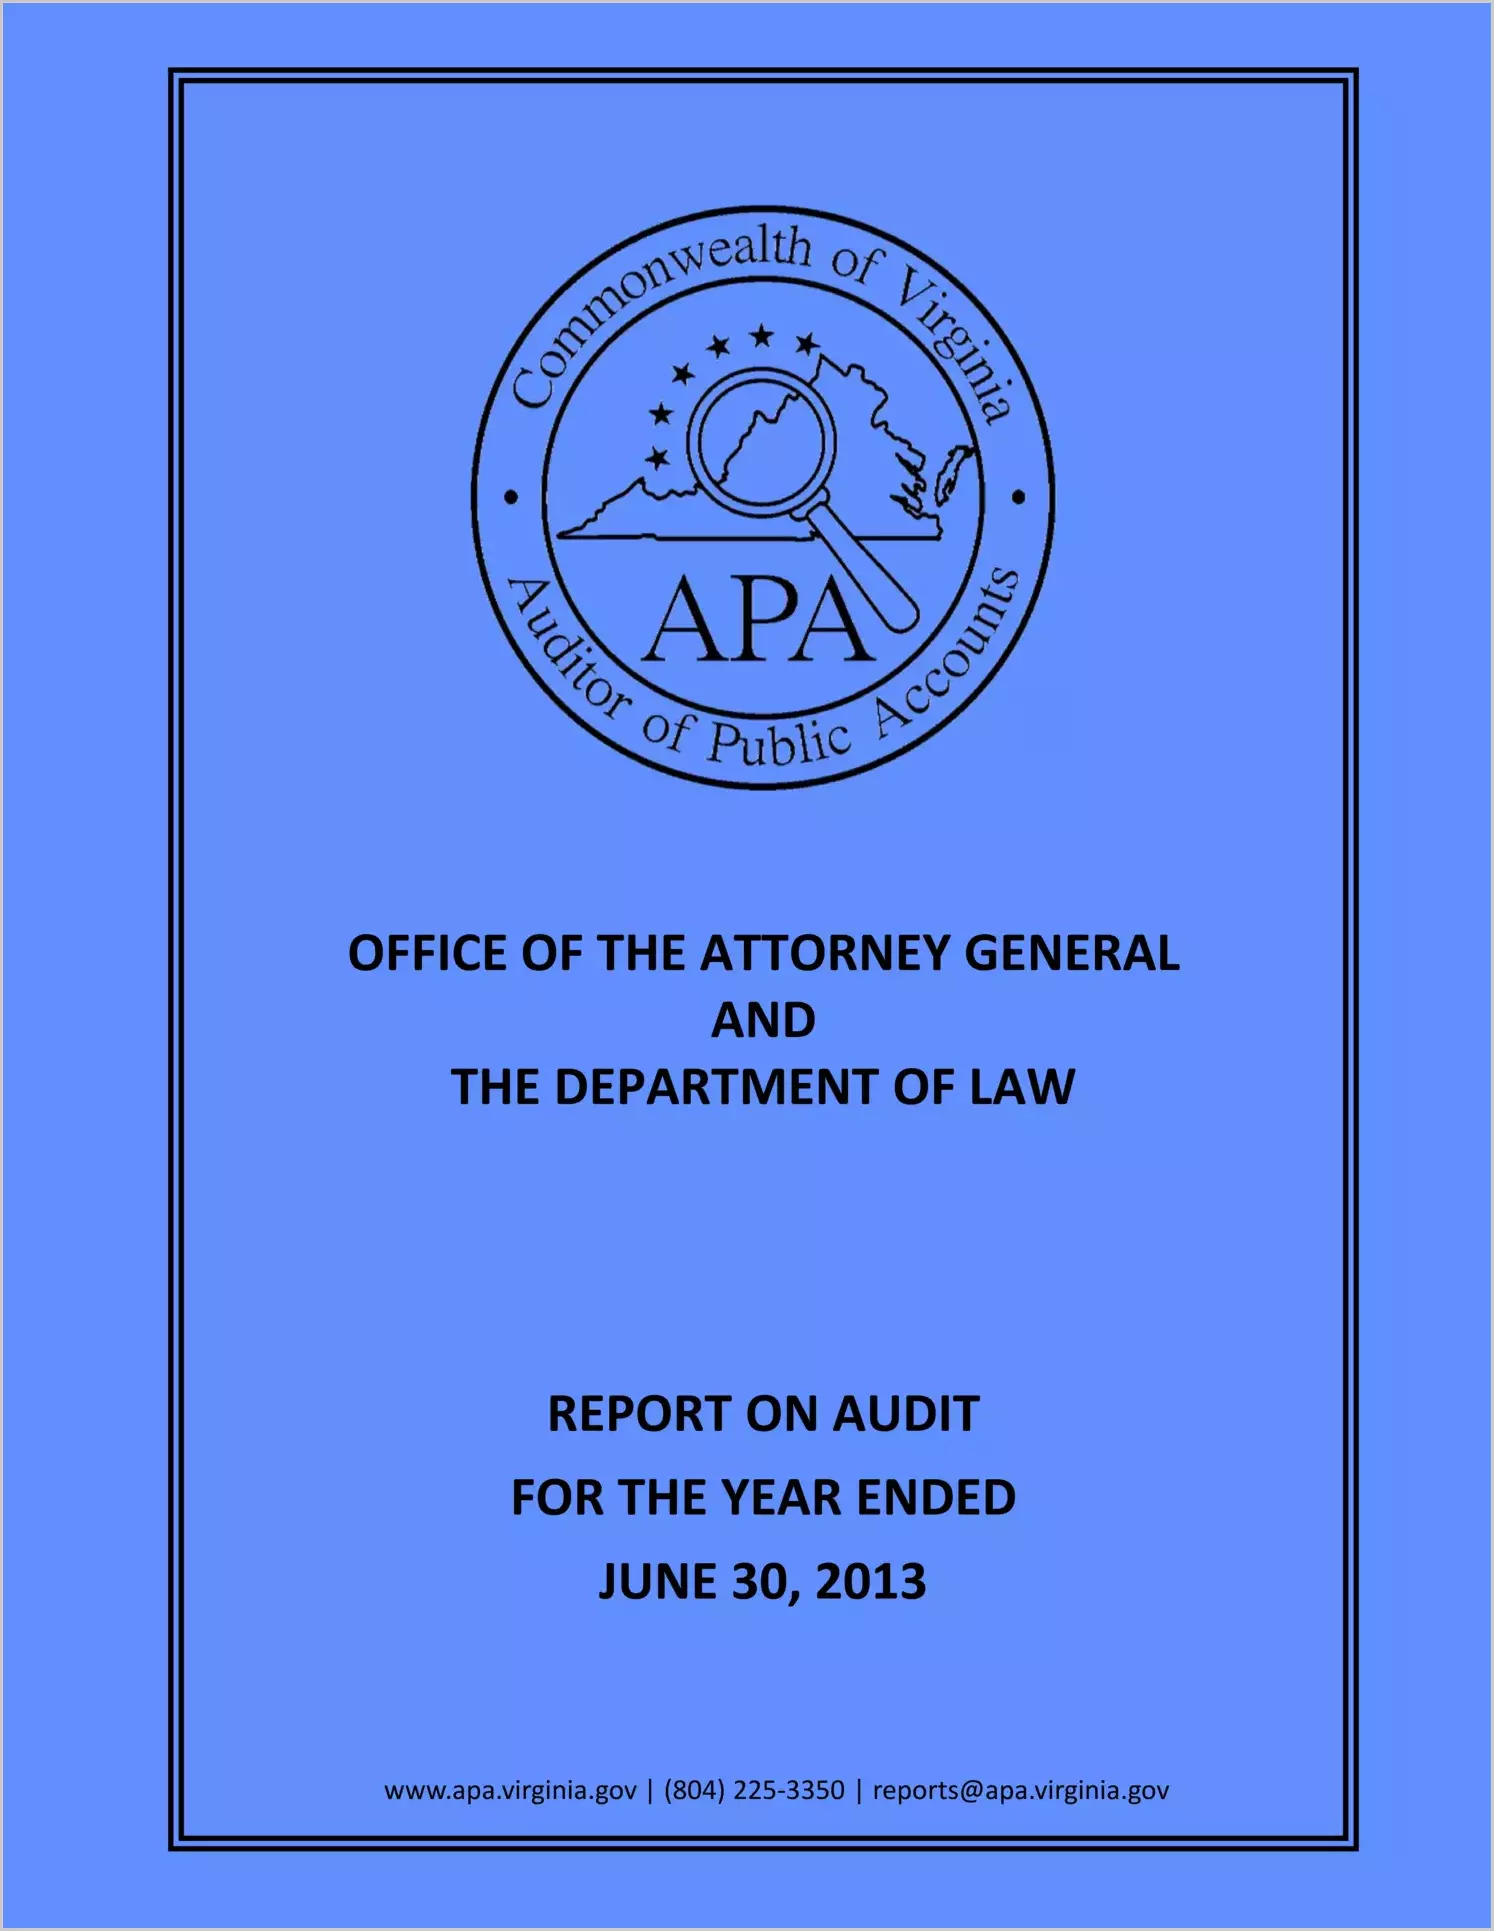 Office Of The Attorney General And The Department Of Law Report On Audit For The Year Ended June 30, 2013